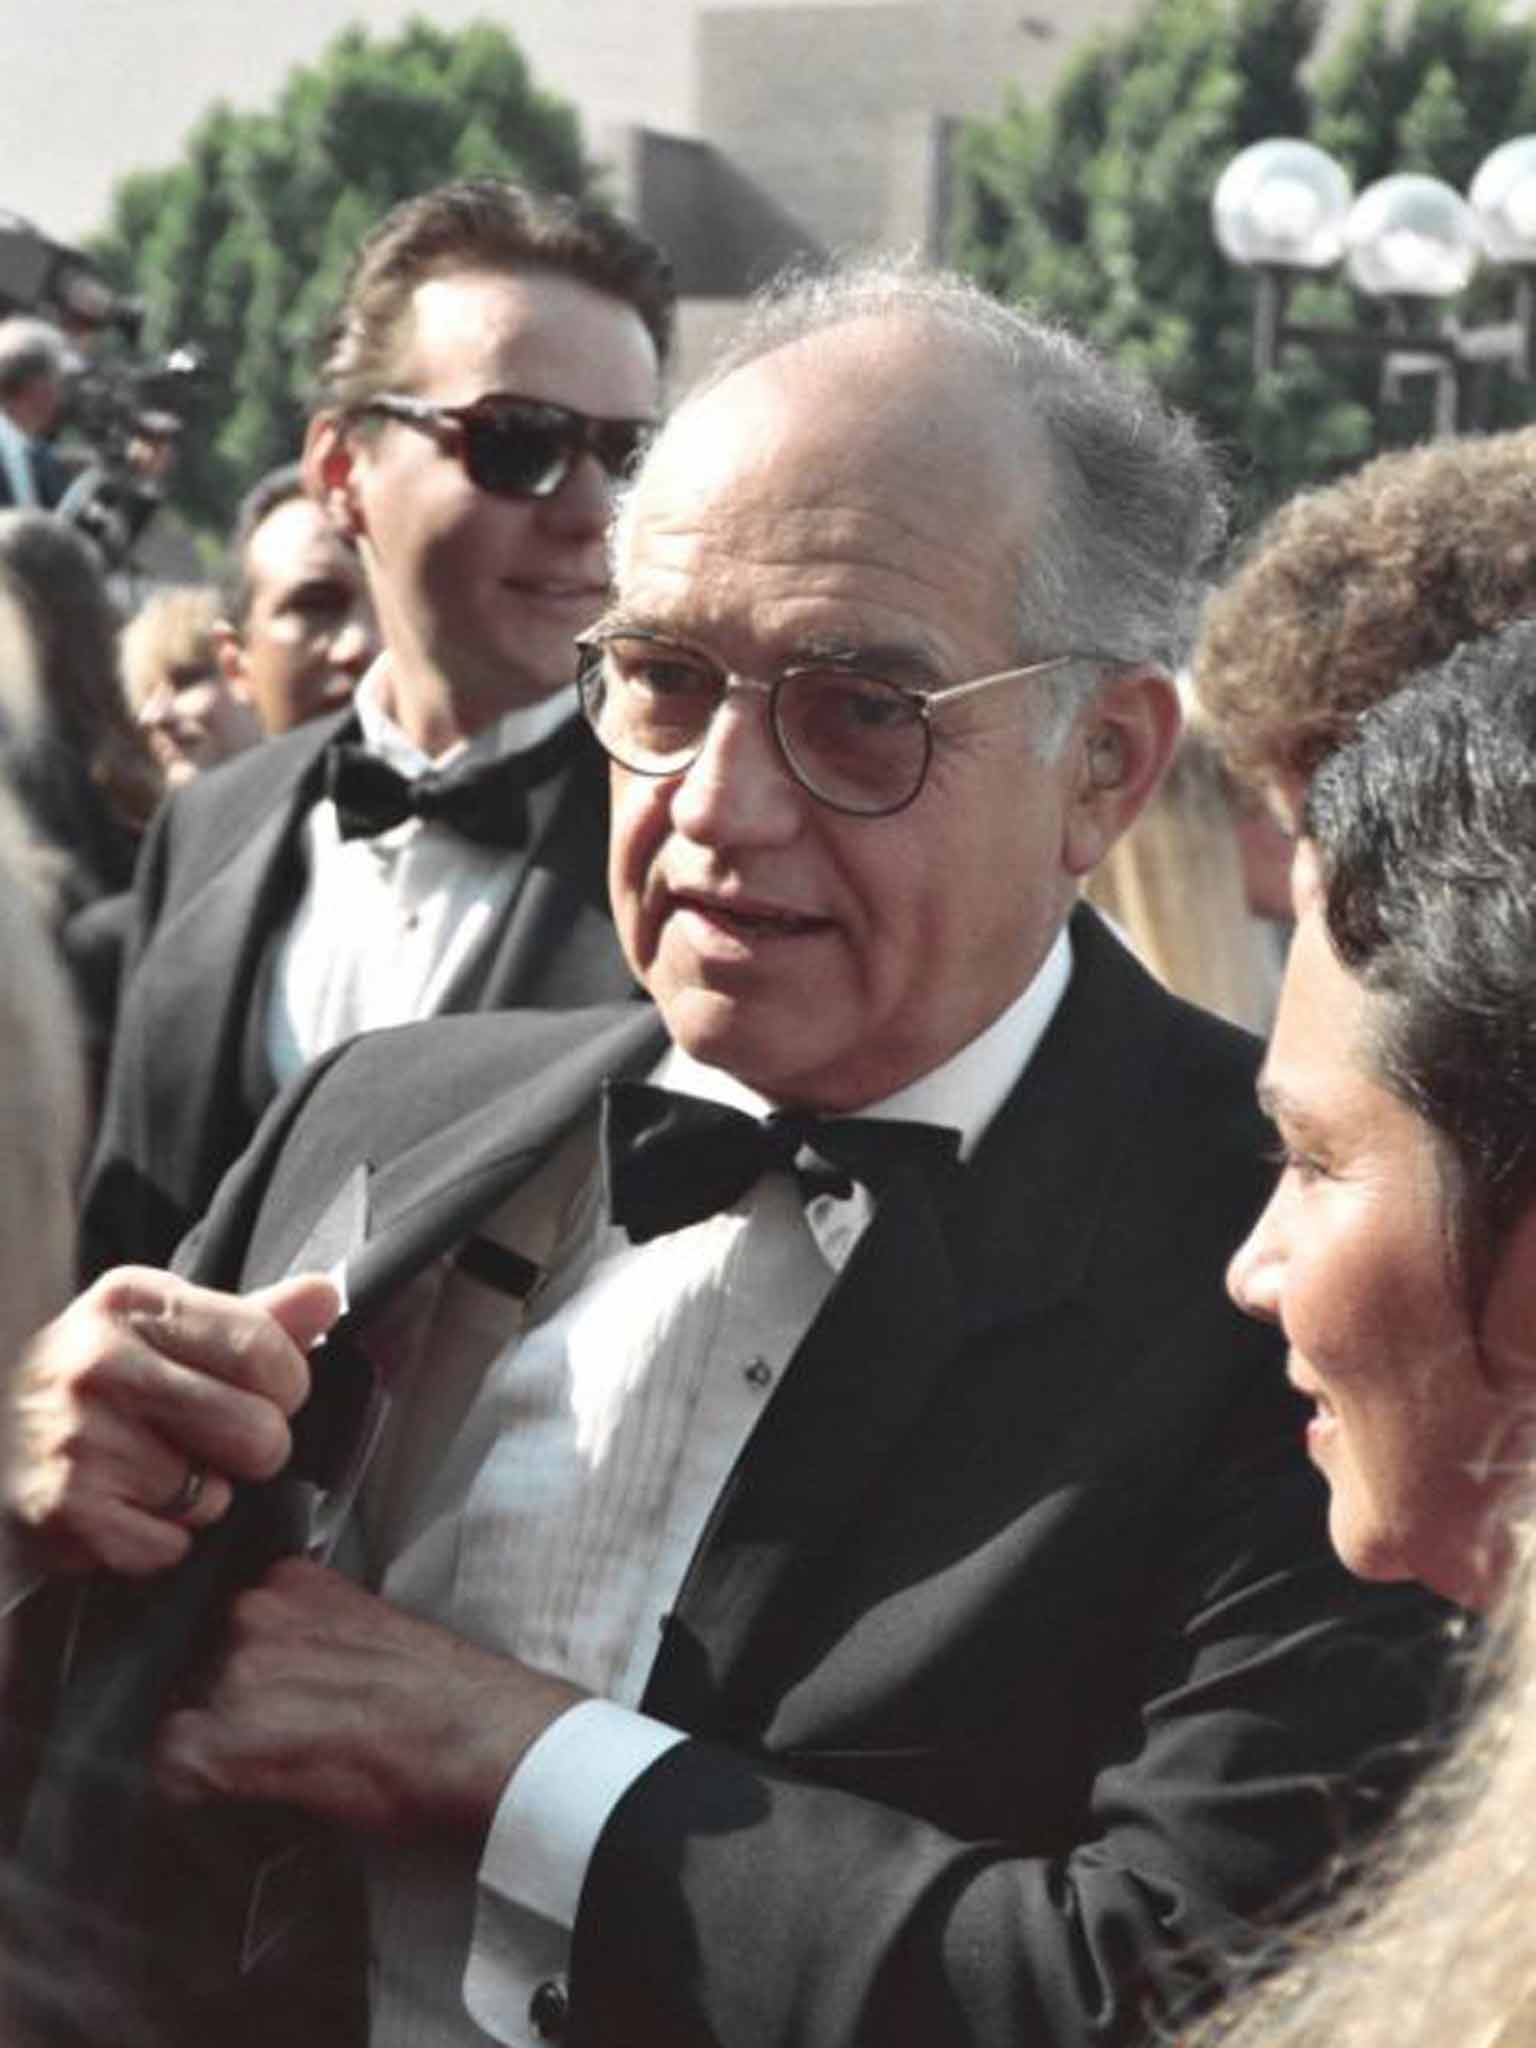 Dysart at the 1988 Emmys: he was to be a winner in 1992